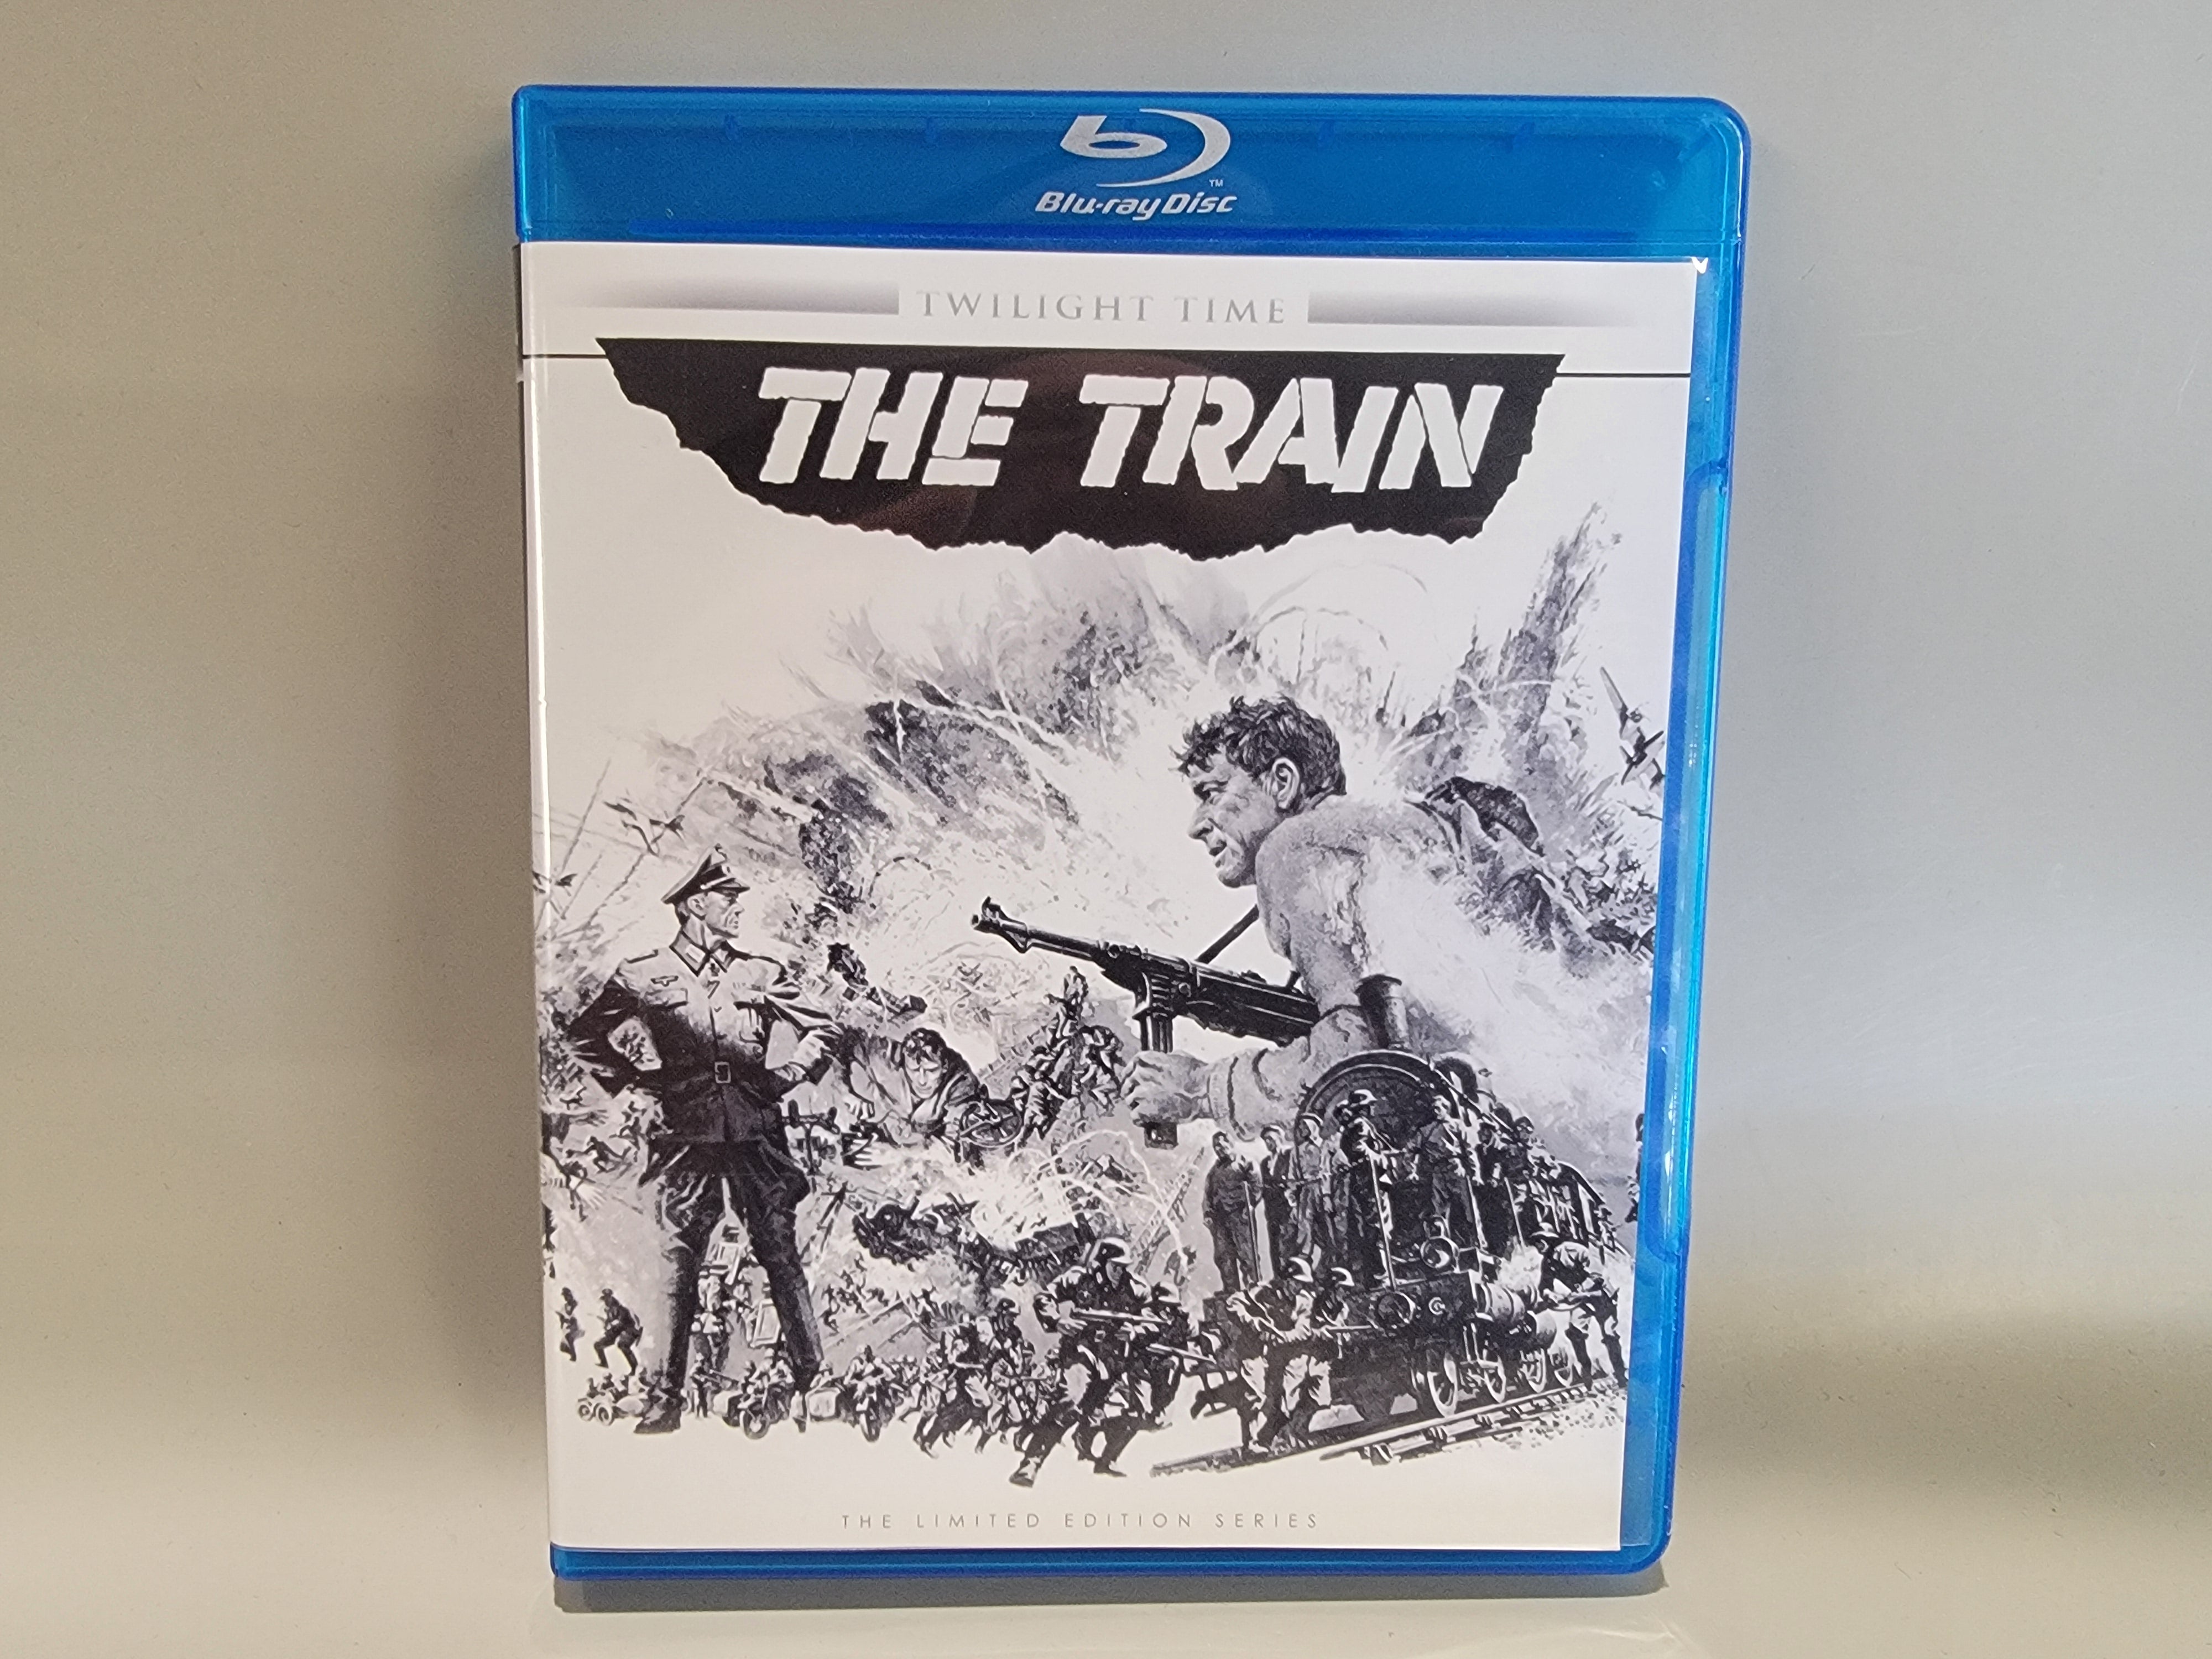 THE TRAIN (LIMITED EDITION) BLU-RAY [USED]